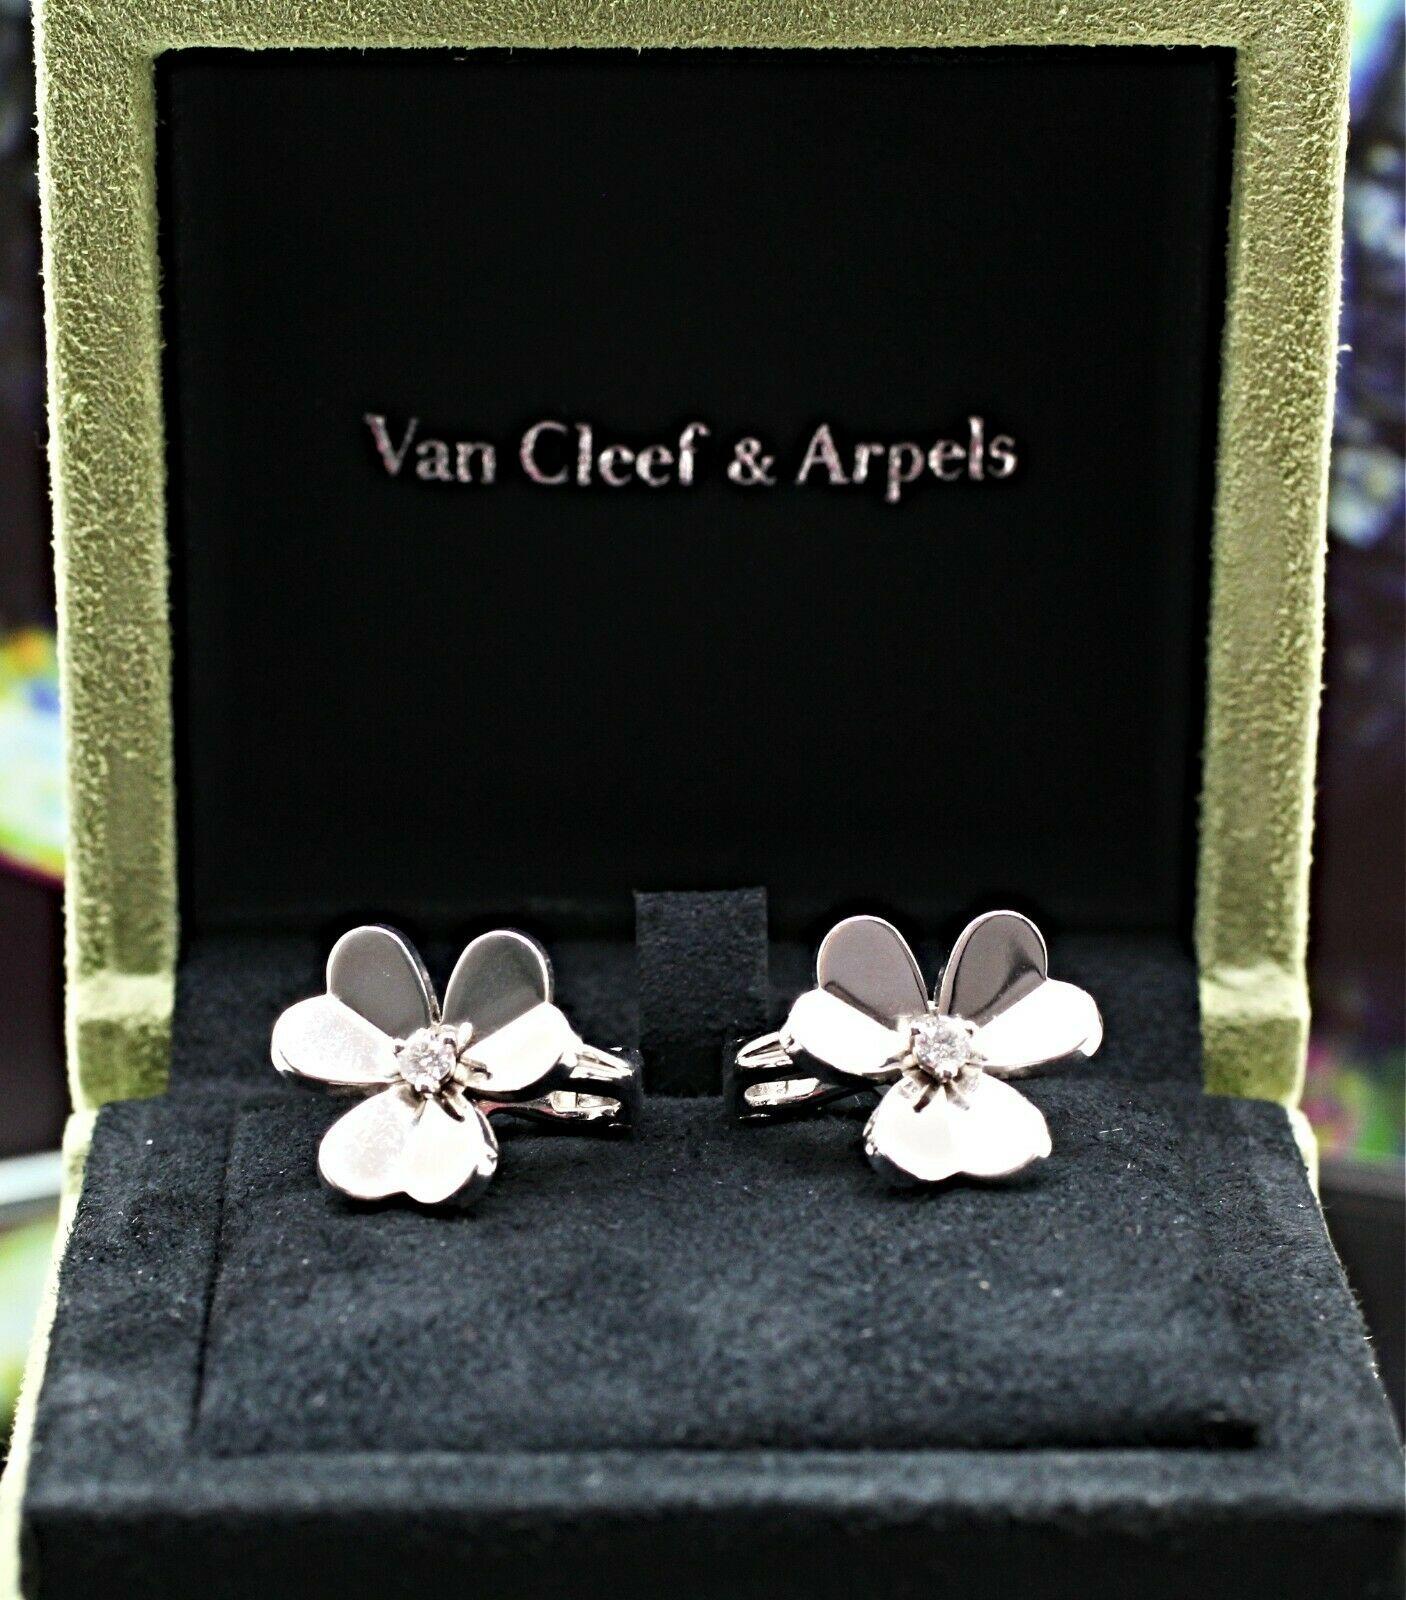 SPECIFICATIONS:
MAIN STONE:
ROUND CUT DIAMONDS 2 
CARAT TOTAL WEIGHT: APPROXIMATELY 0.17 cts.
COLOR: DEF,
CLARITY: IF TO VVS
BRAND: VAN CLEEF&ARPELS
METAL: 18K WHITE GOLD
TYPE: EARRINGS
WEIGHT: 8.50 GRS
LENGHT: 15 MM
HALLMARK: VCA AU750
PRODUCT